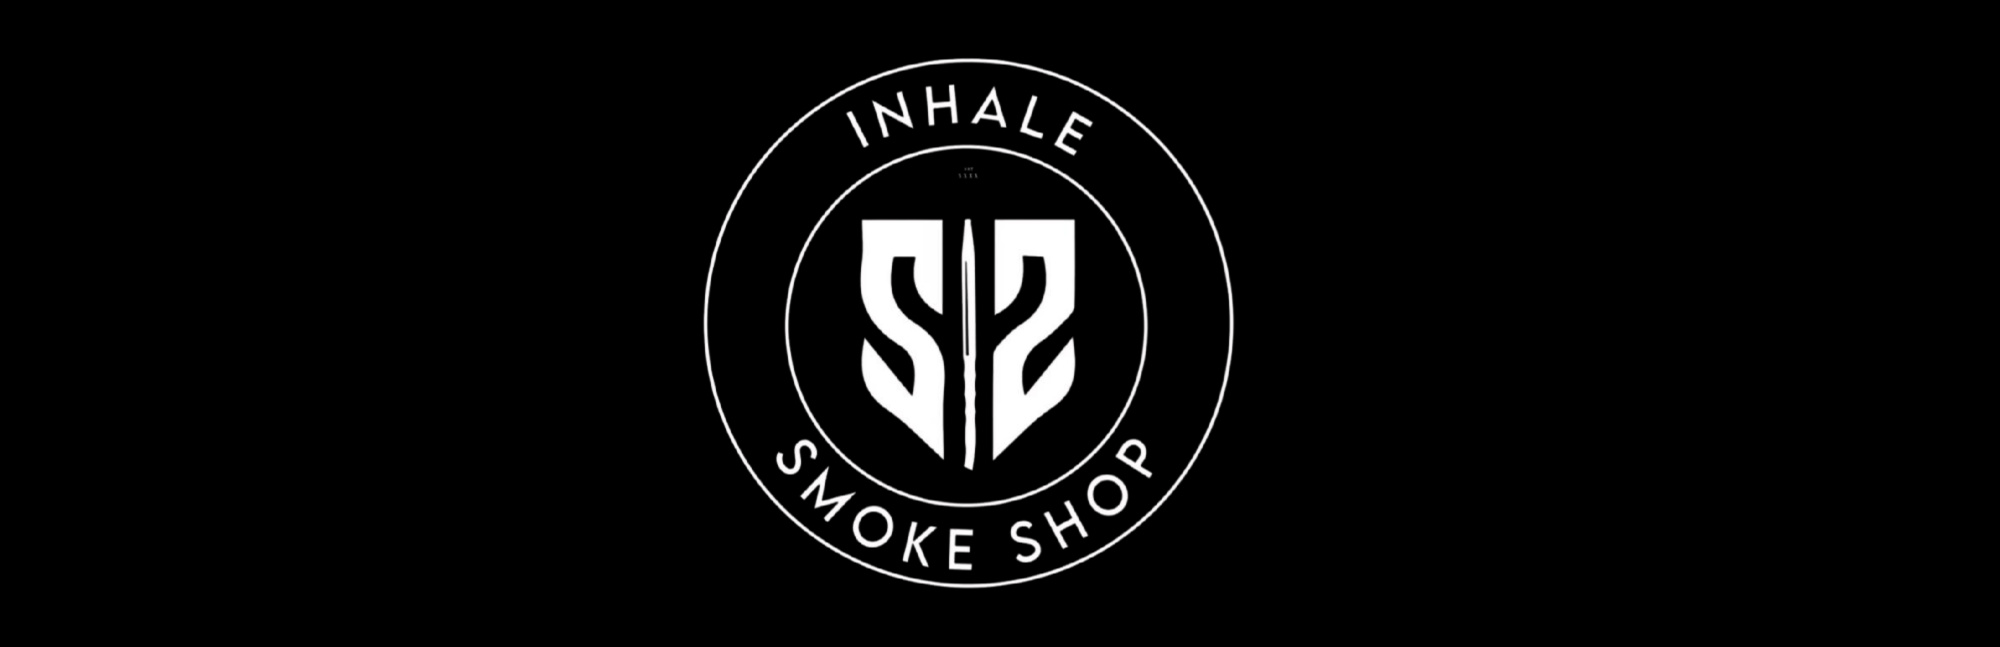 image of inhale smoke shop in greenville nc